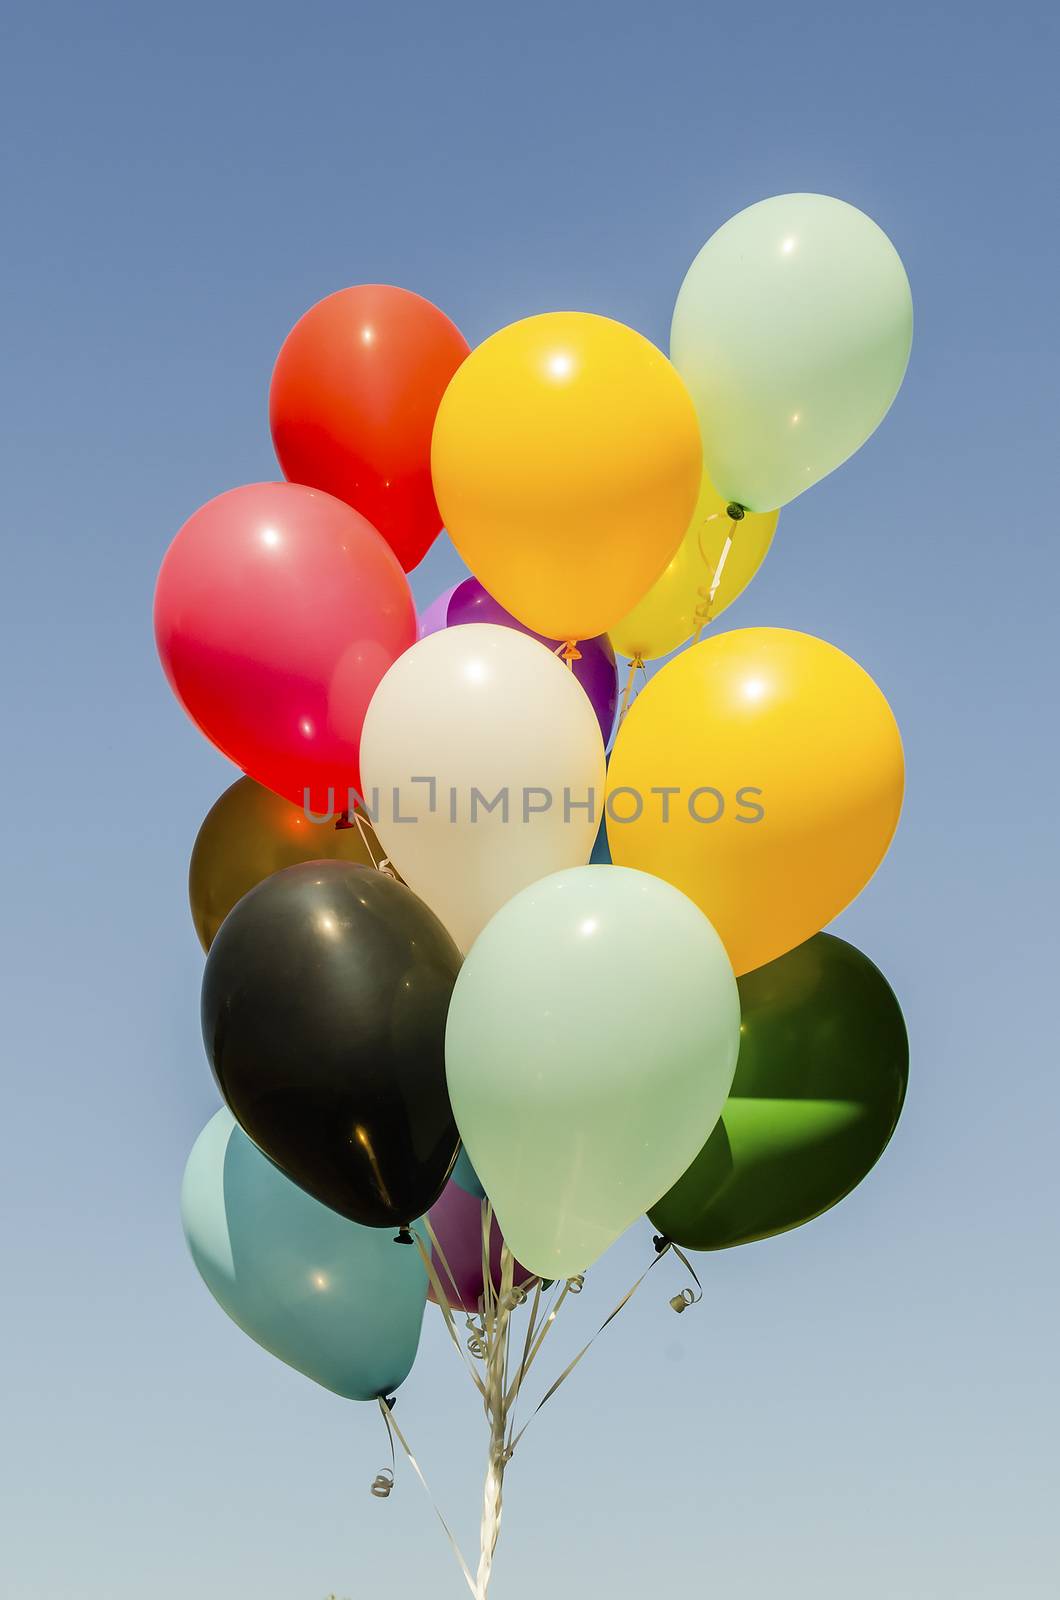 Colorful bunch of helium balloons isolated on background